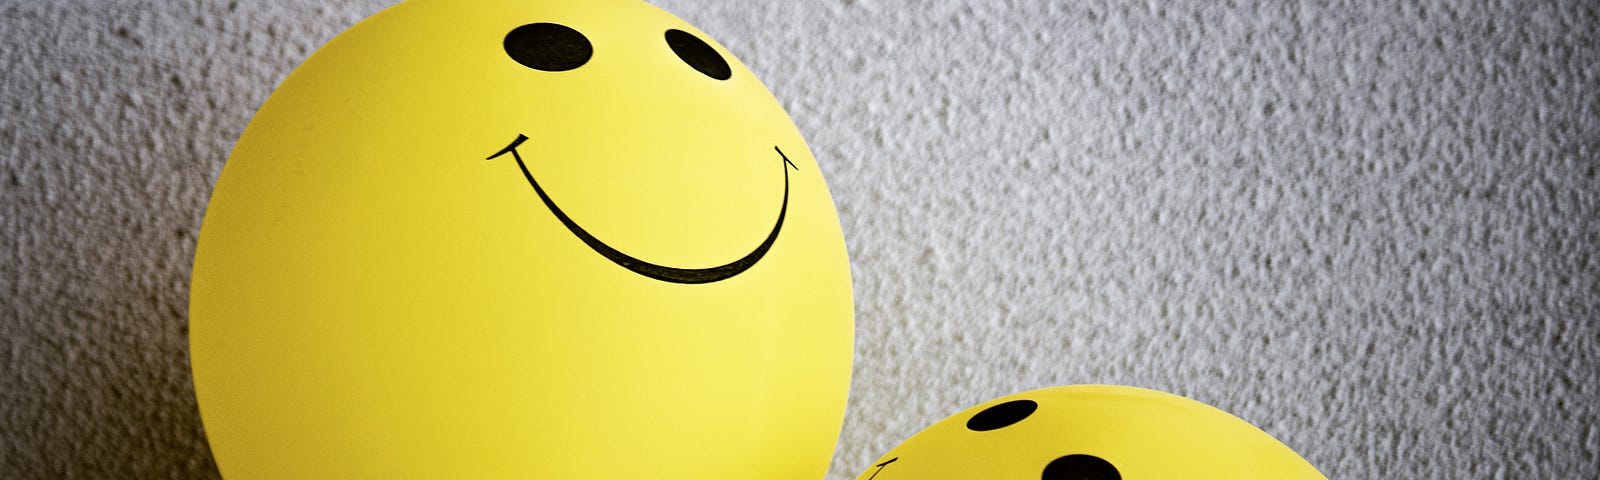 Three bright yellow balloons with smiley faces on them.